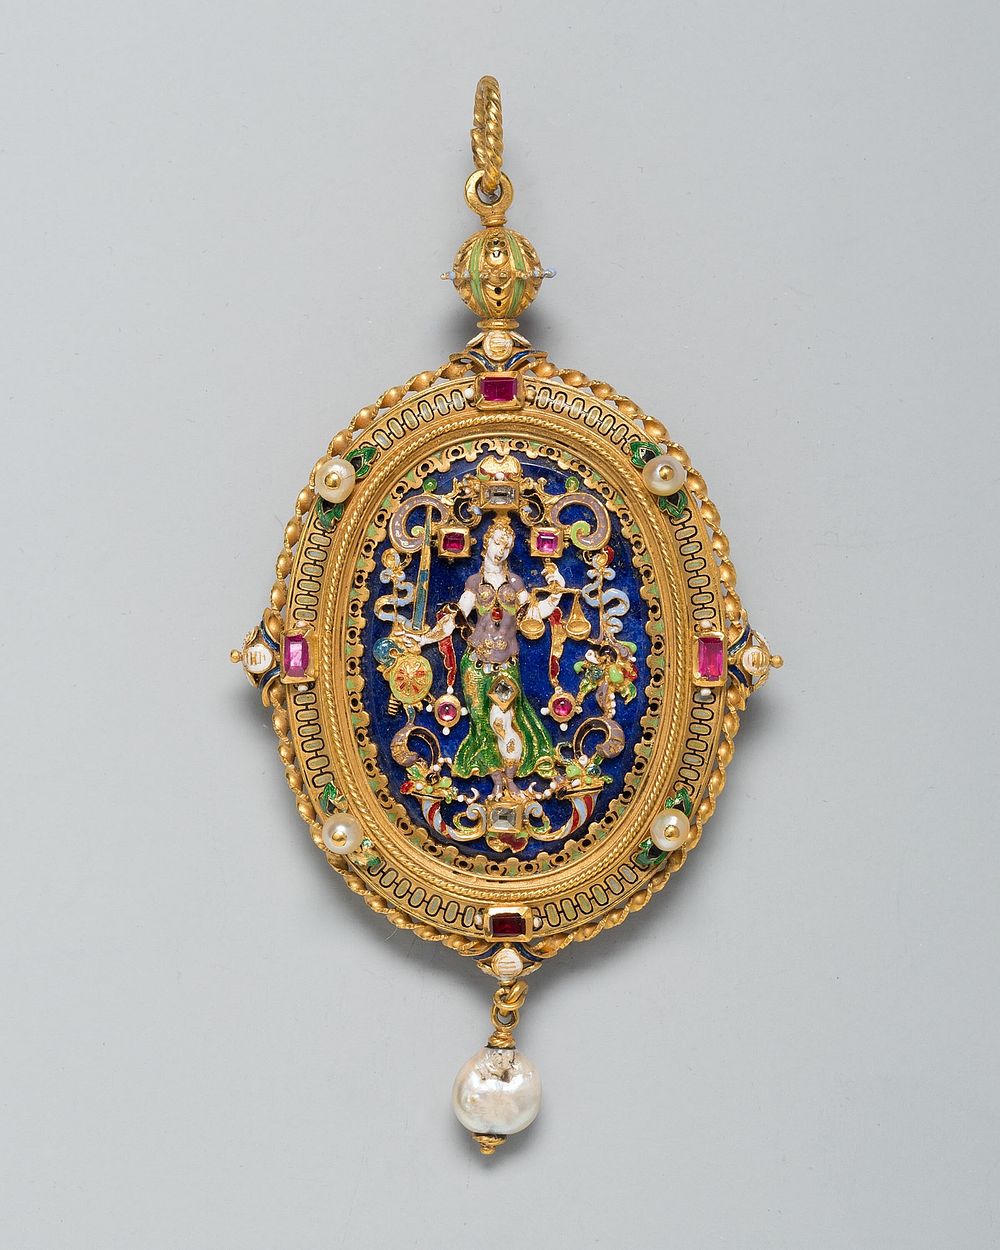 Pendant with Figure of Justice